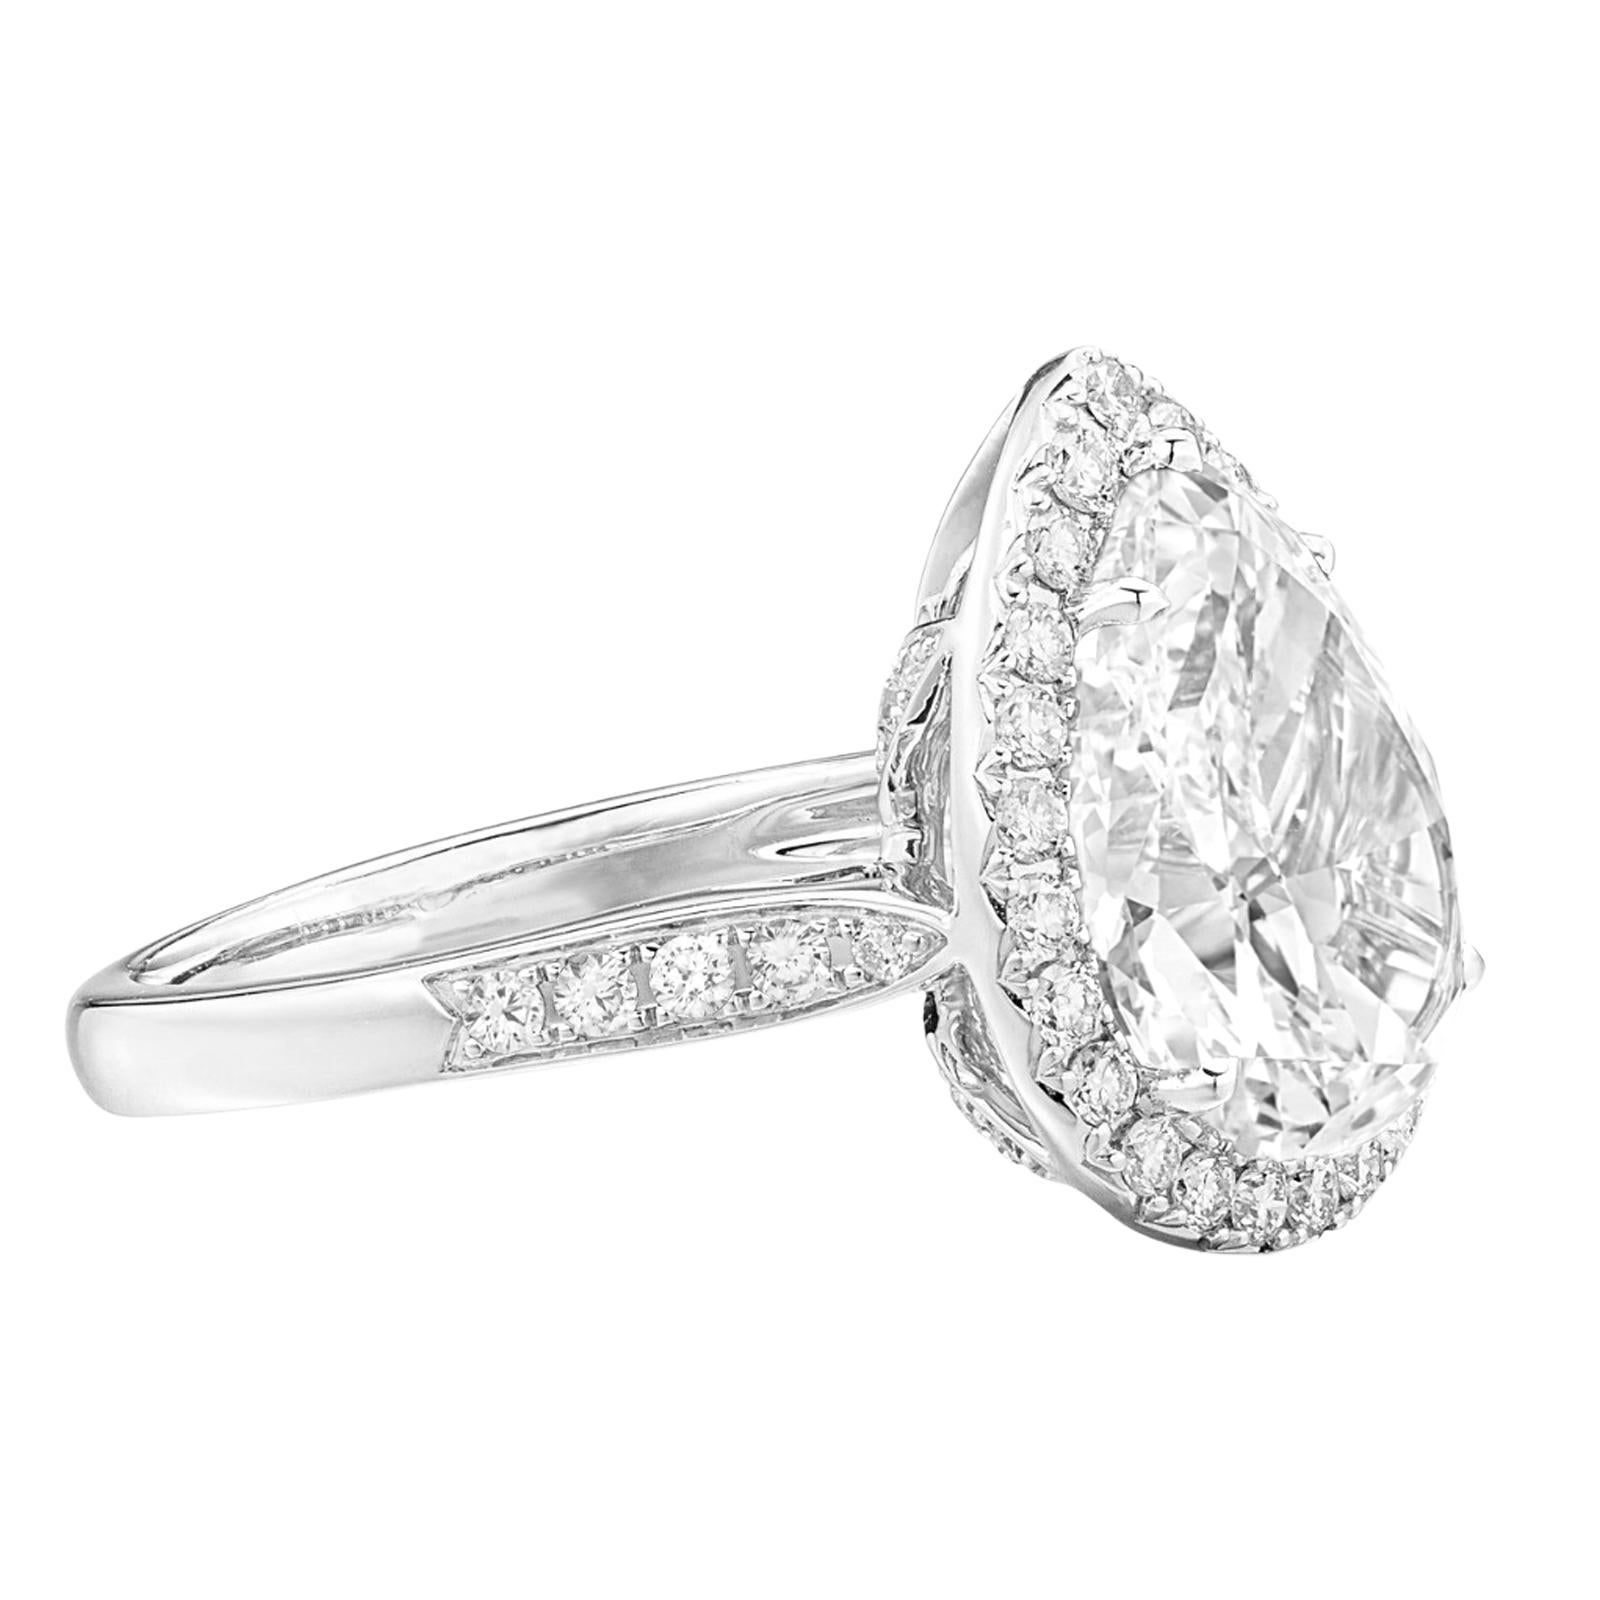 5,36 carat D color Internal flawless clarity GIA certified diamond with a halo and pave setting, elegantly nestled in 18k white gold. This exquisite diamond transcends mere luxury; it represents a strategic investment choice with undeniable